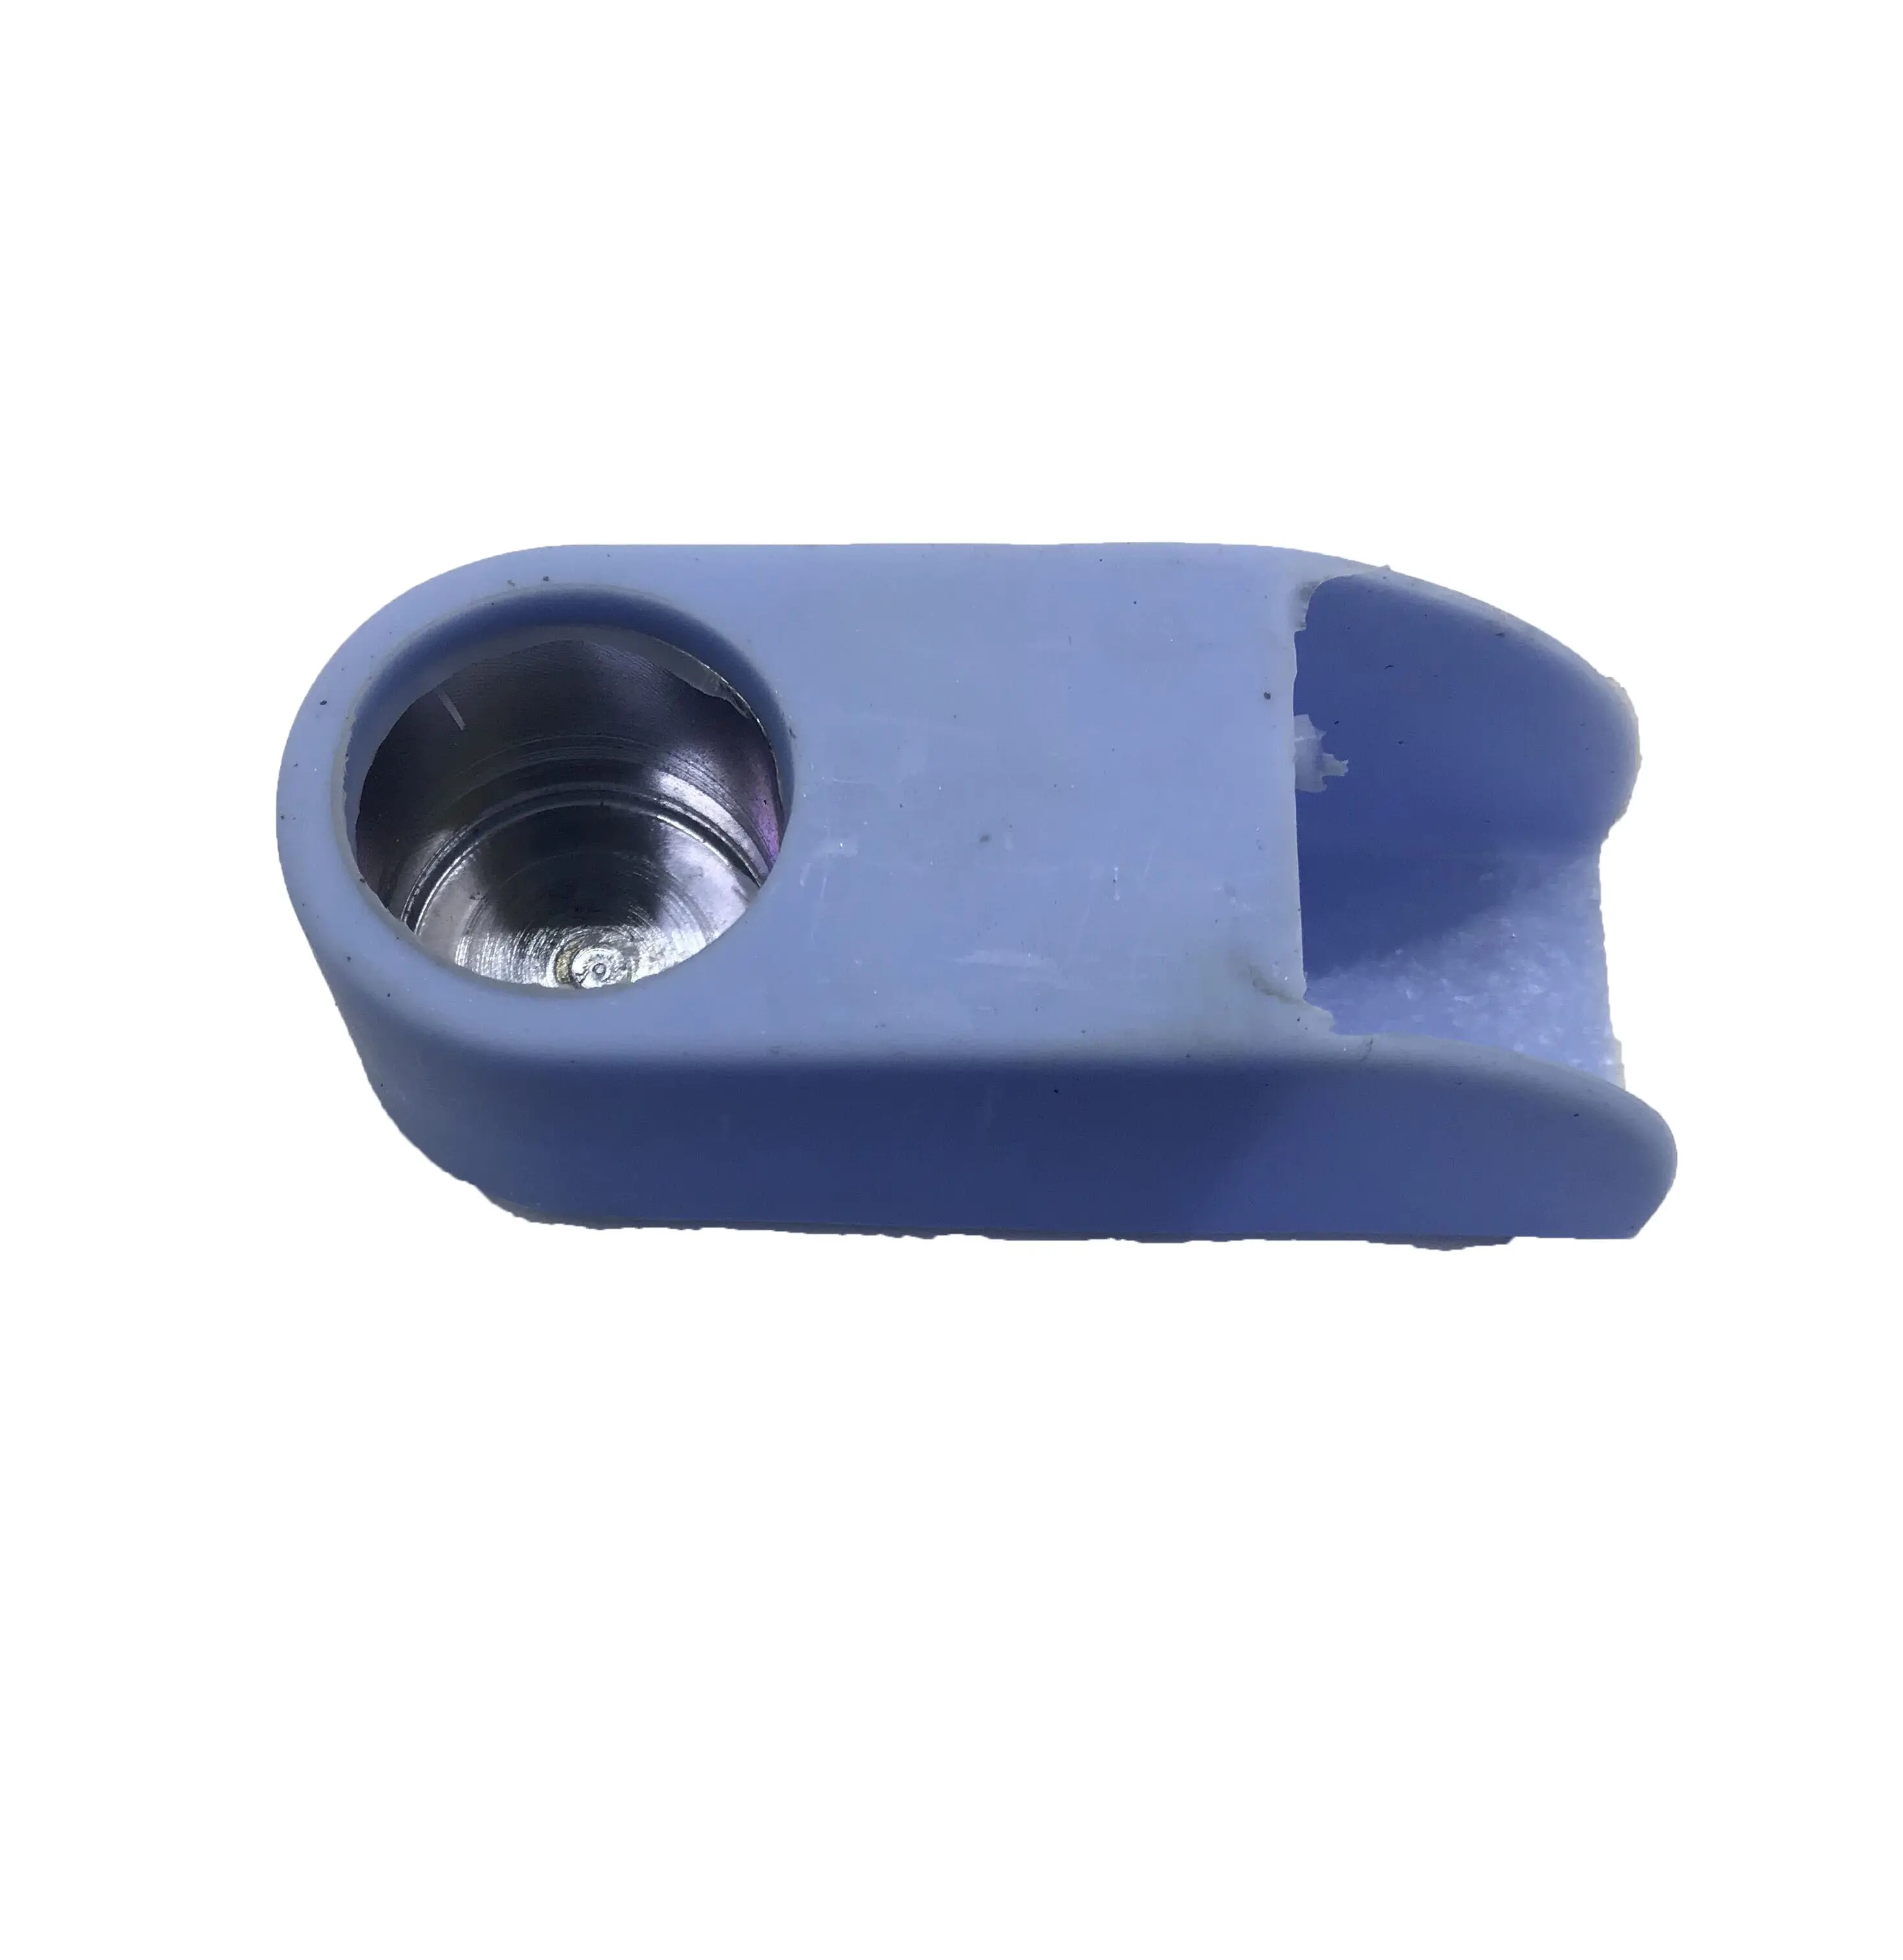 YM Special-shaped rubber covered iron parts foot pads with screws inside anti-slip cushioning pads used for mechanical tables